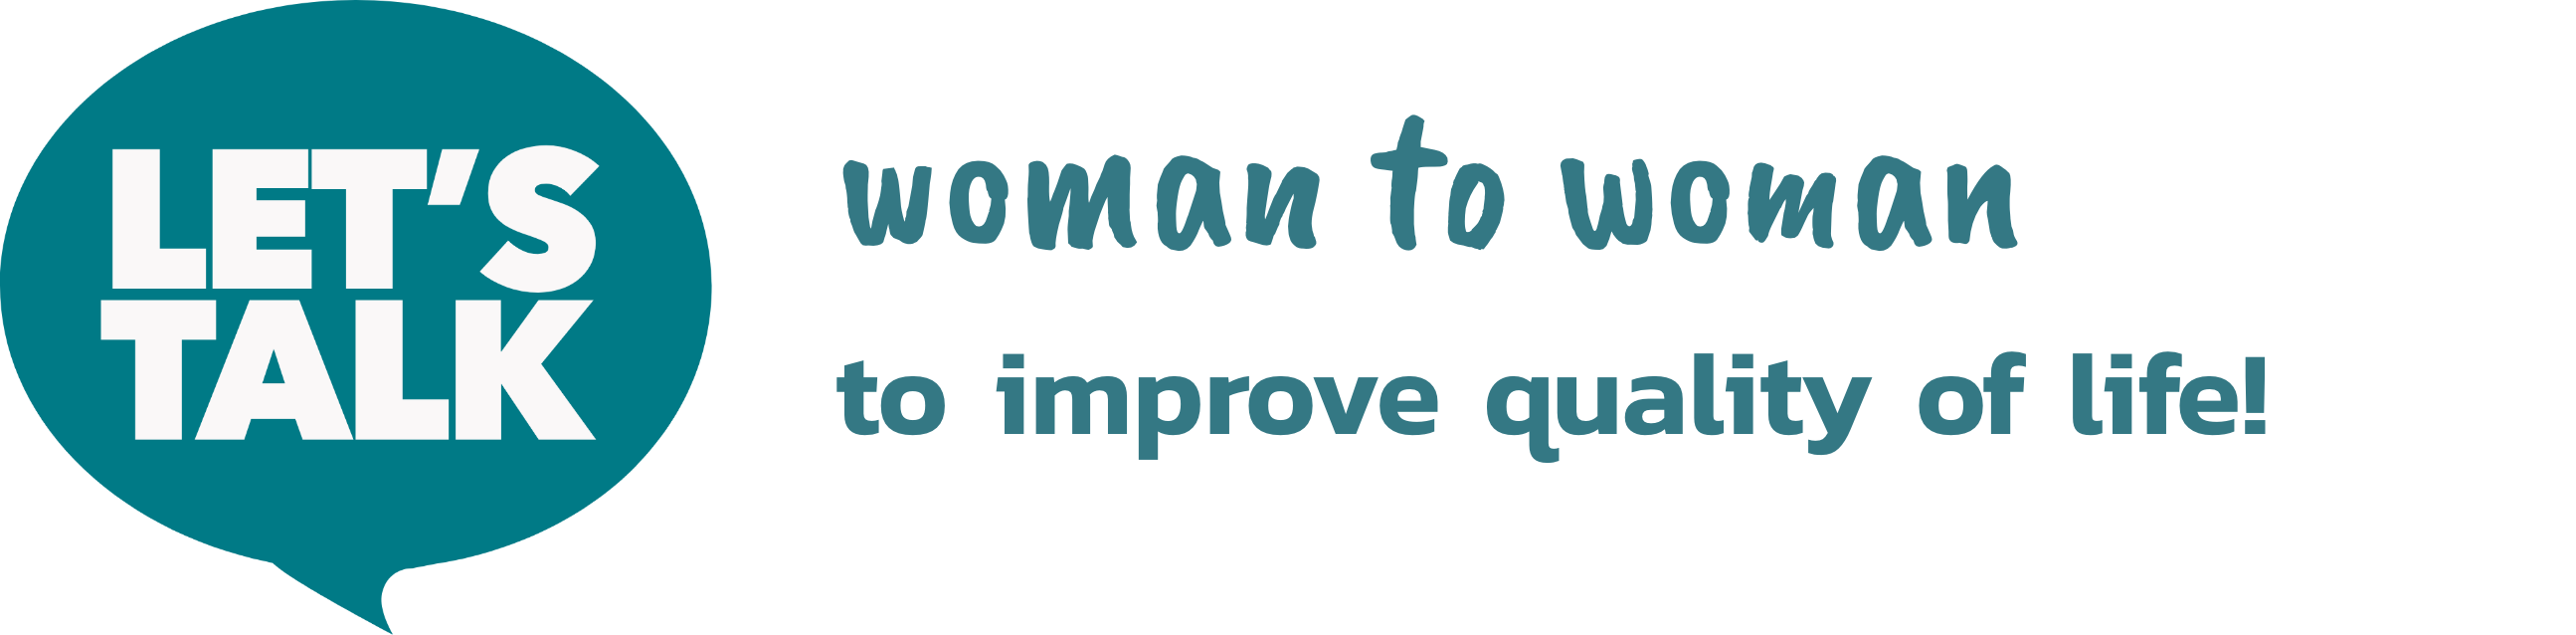 Lets talk women to women to improve quality of life